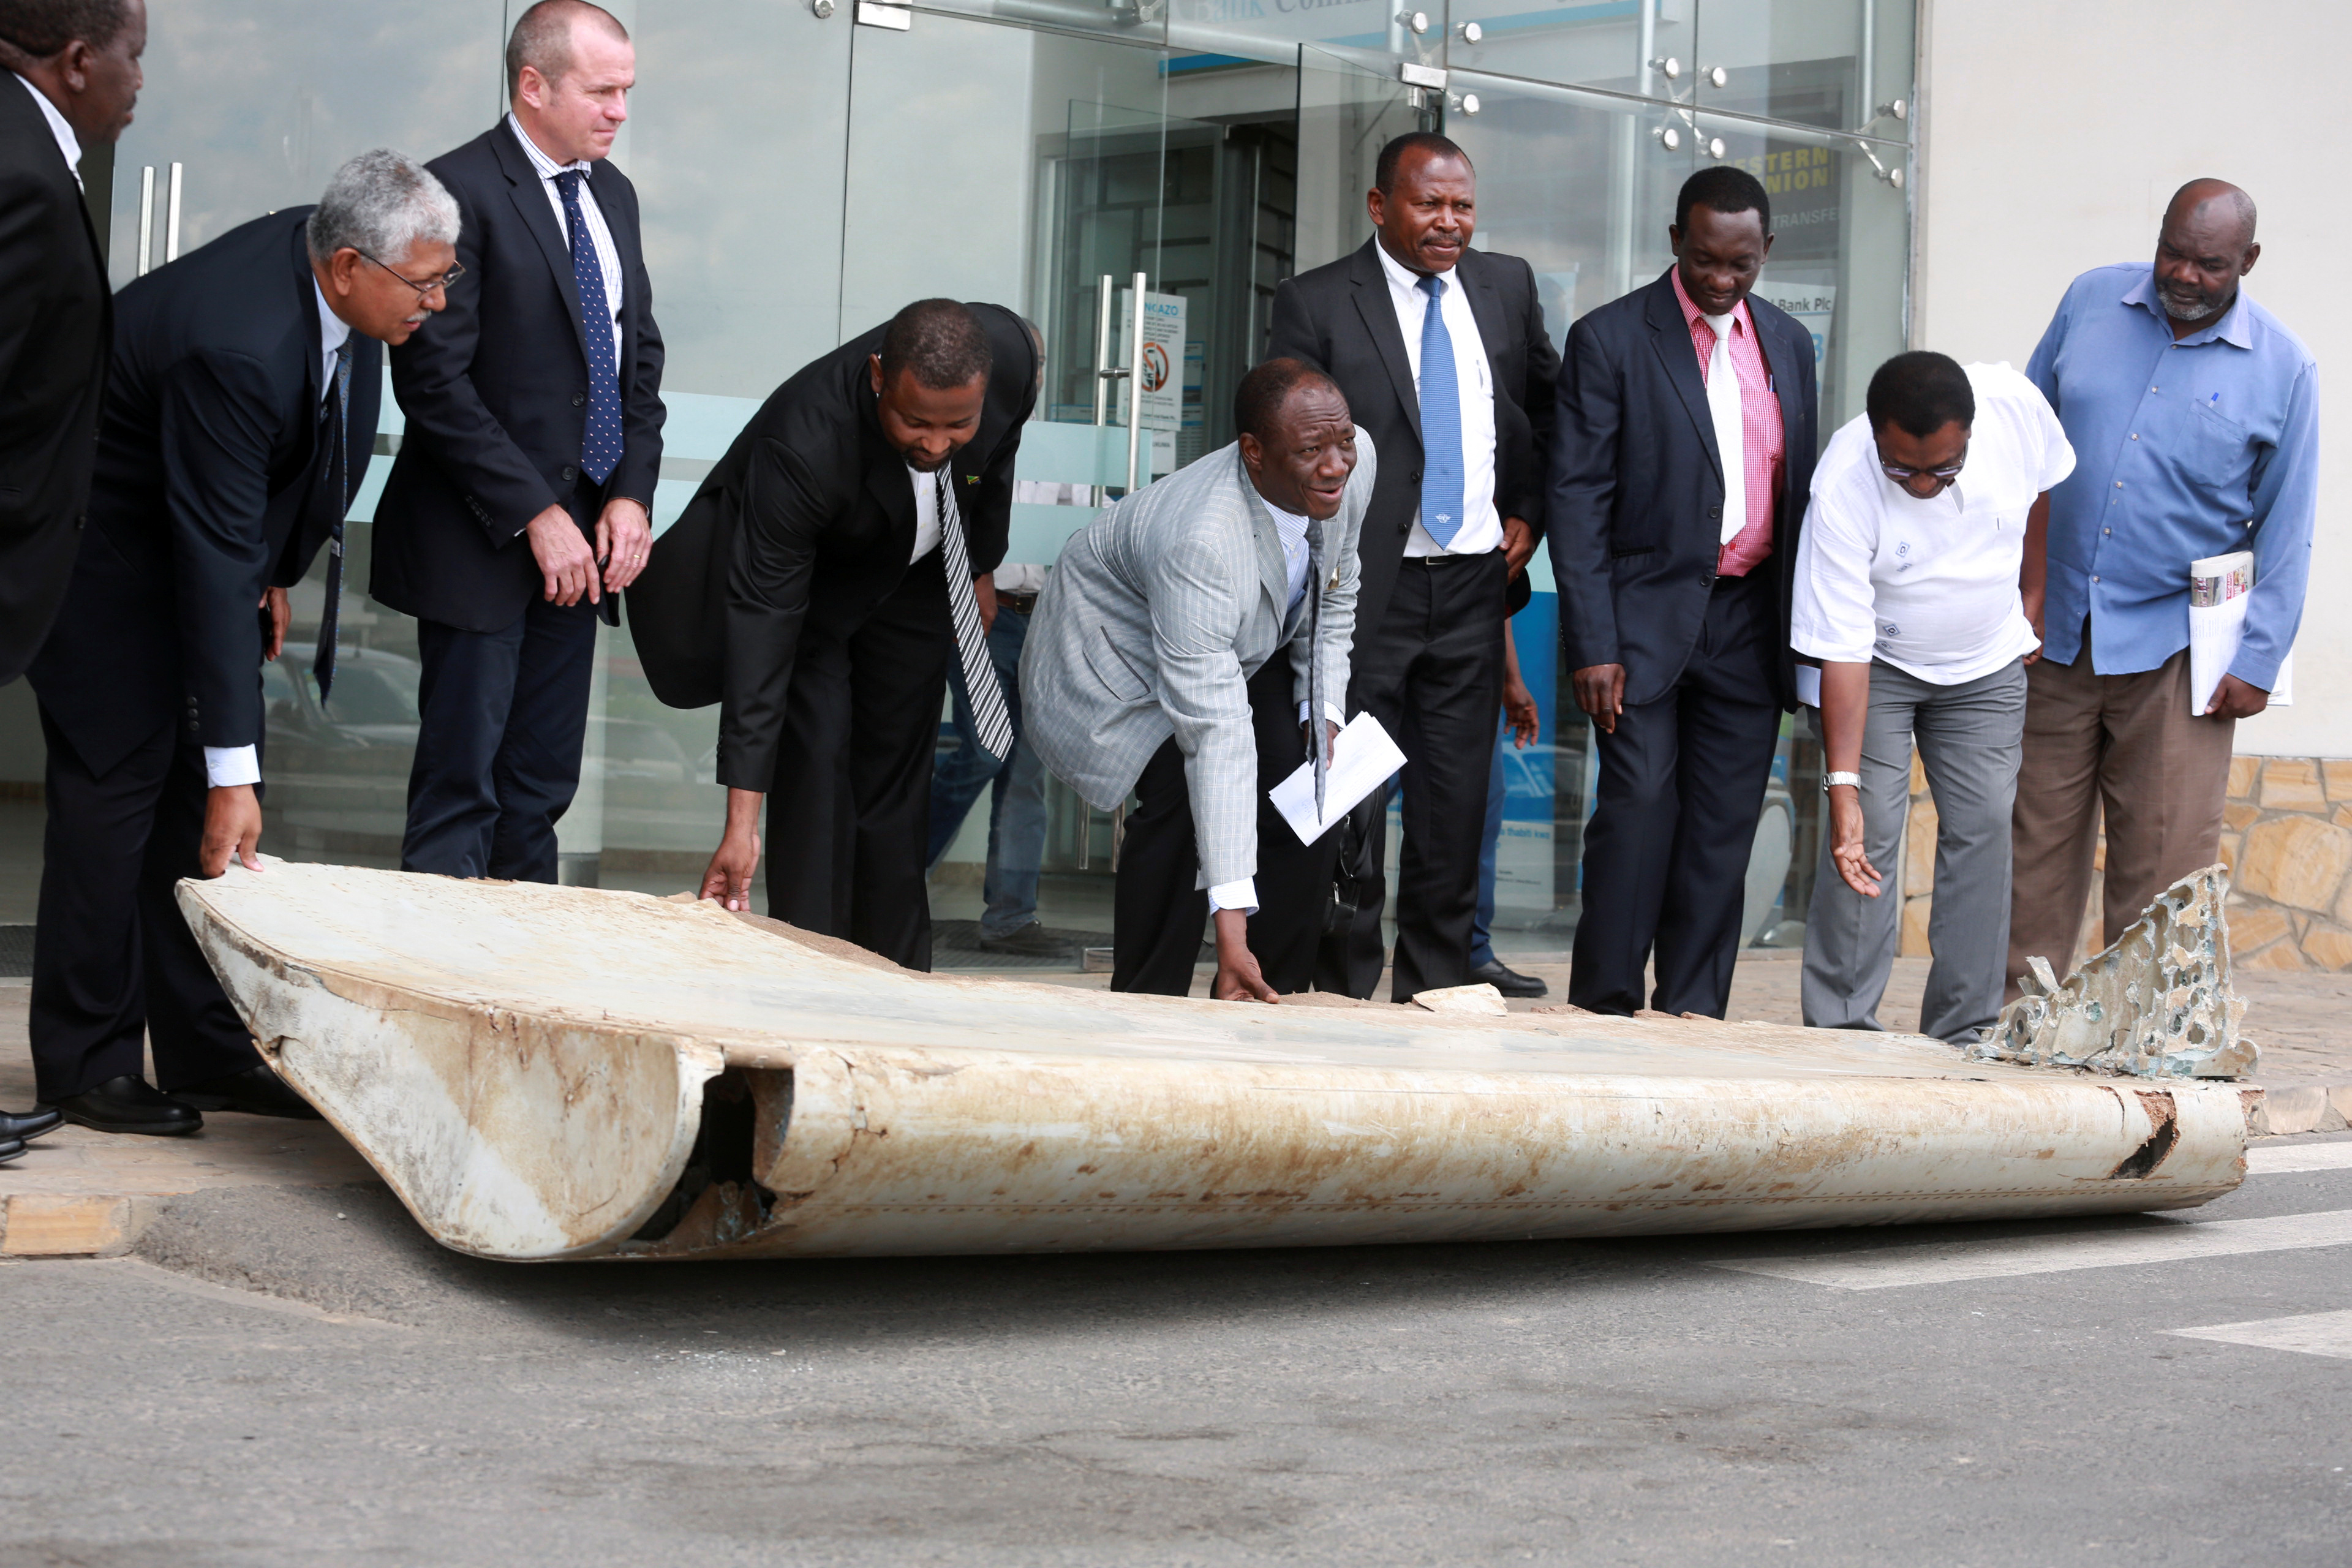 Tanzania Permanent Secretary to the Ministry of Works, Transport and Communication Leonard Chamuriho hands over a fragment suspected to be from the missing MH 370 in Dar es Salaam, Tanzania, on July 15, 2016 (Stringer/Reuters)